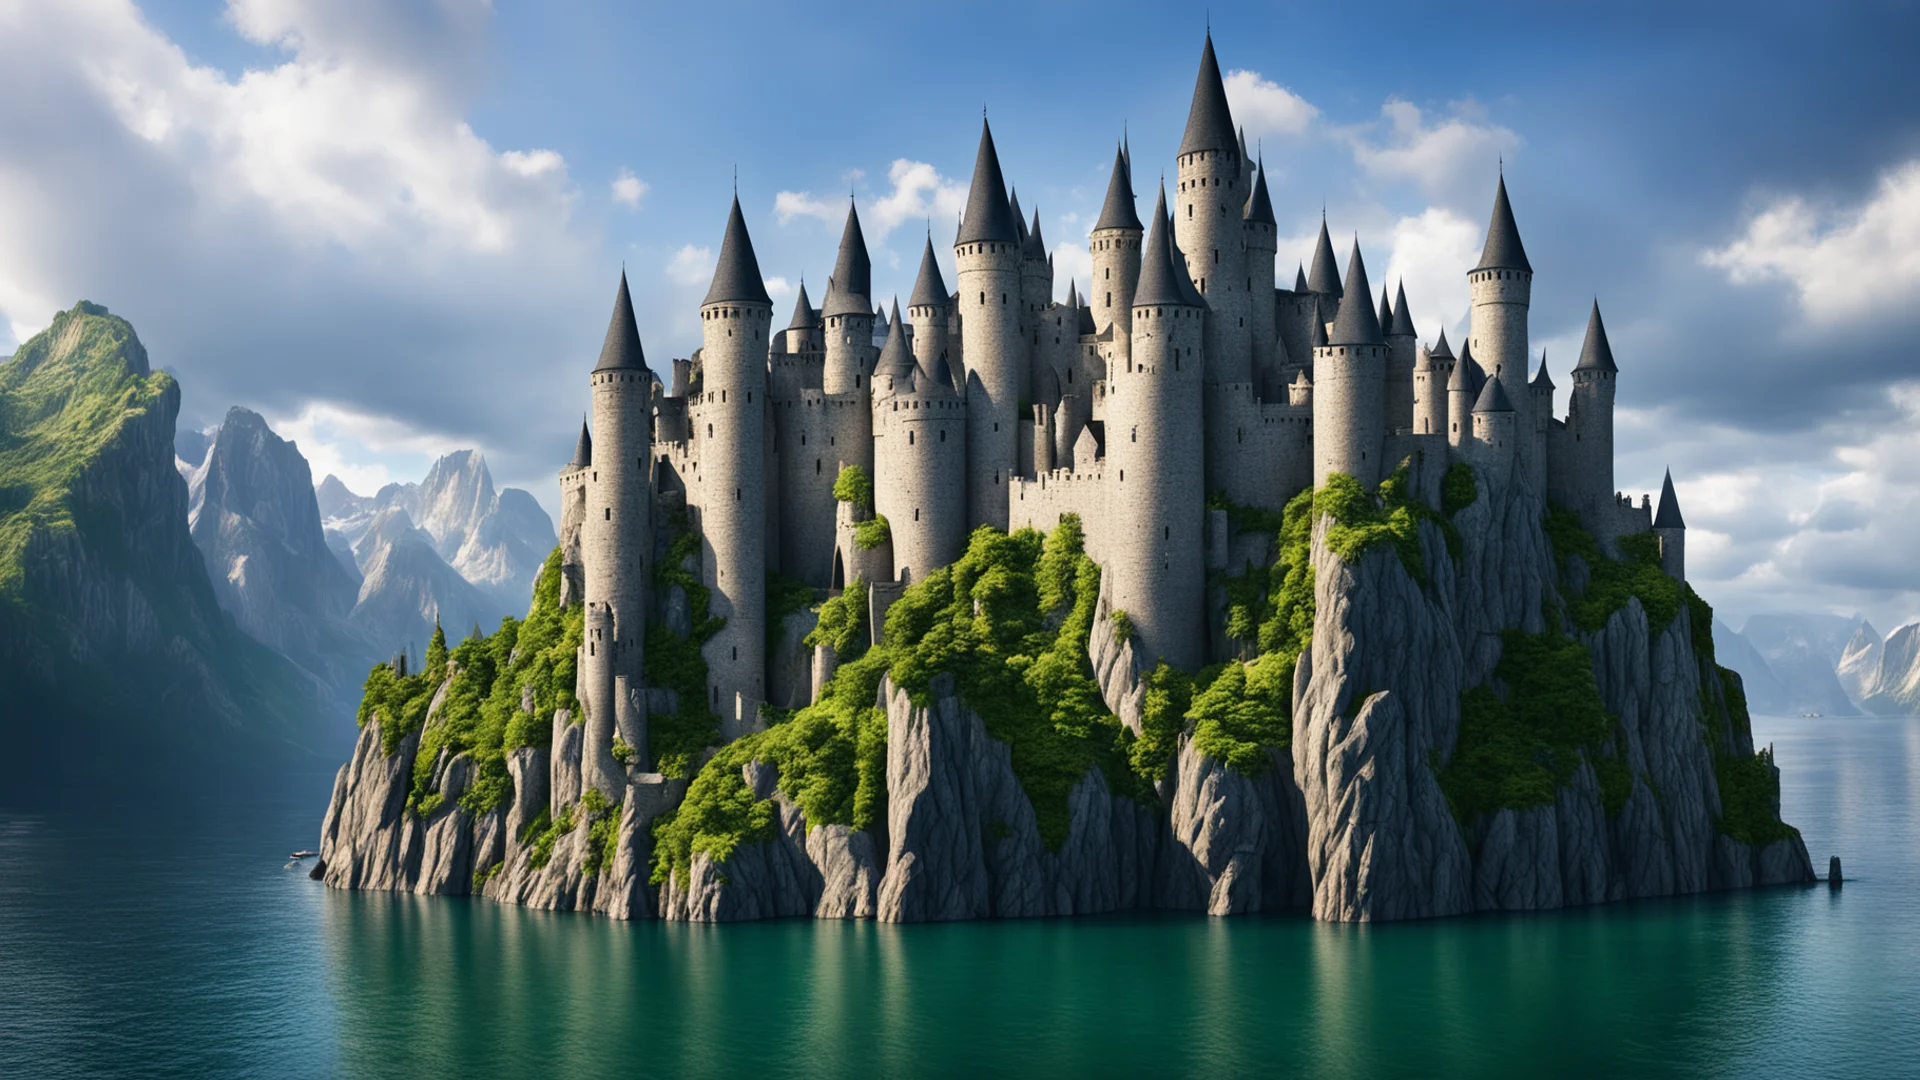 epic cliffs castle over lake large spiraling towers on castle epic shot realistic unreal trending good looking trending fantastic 1 wide